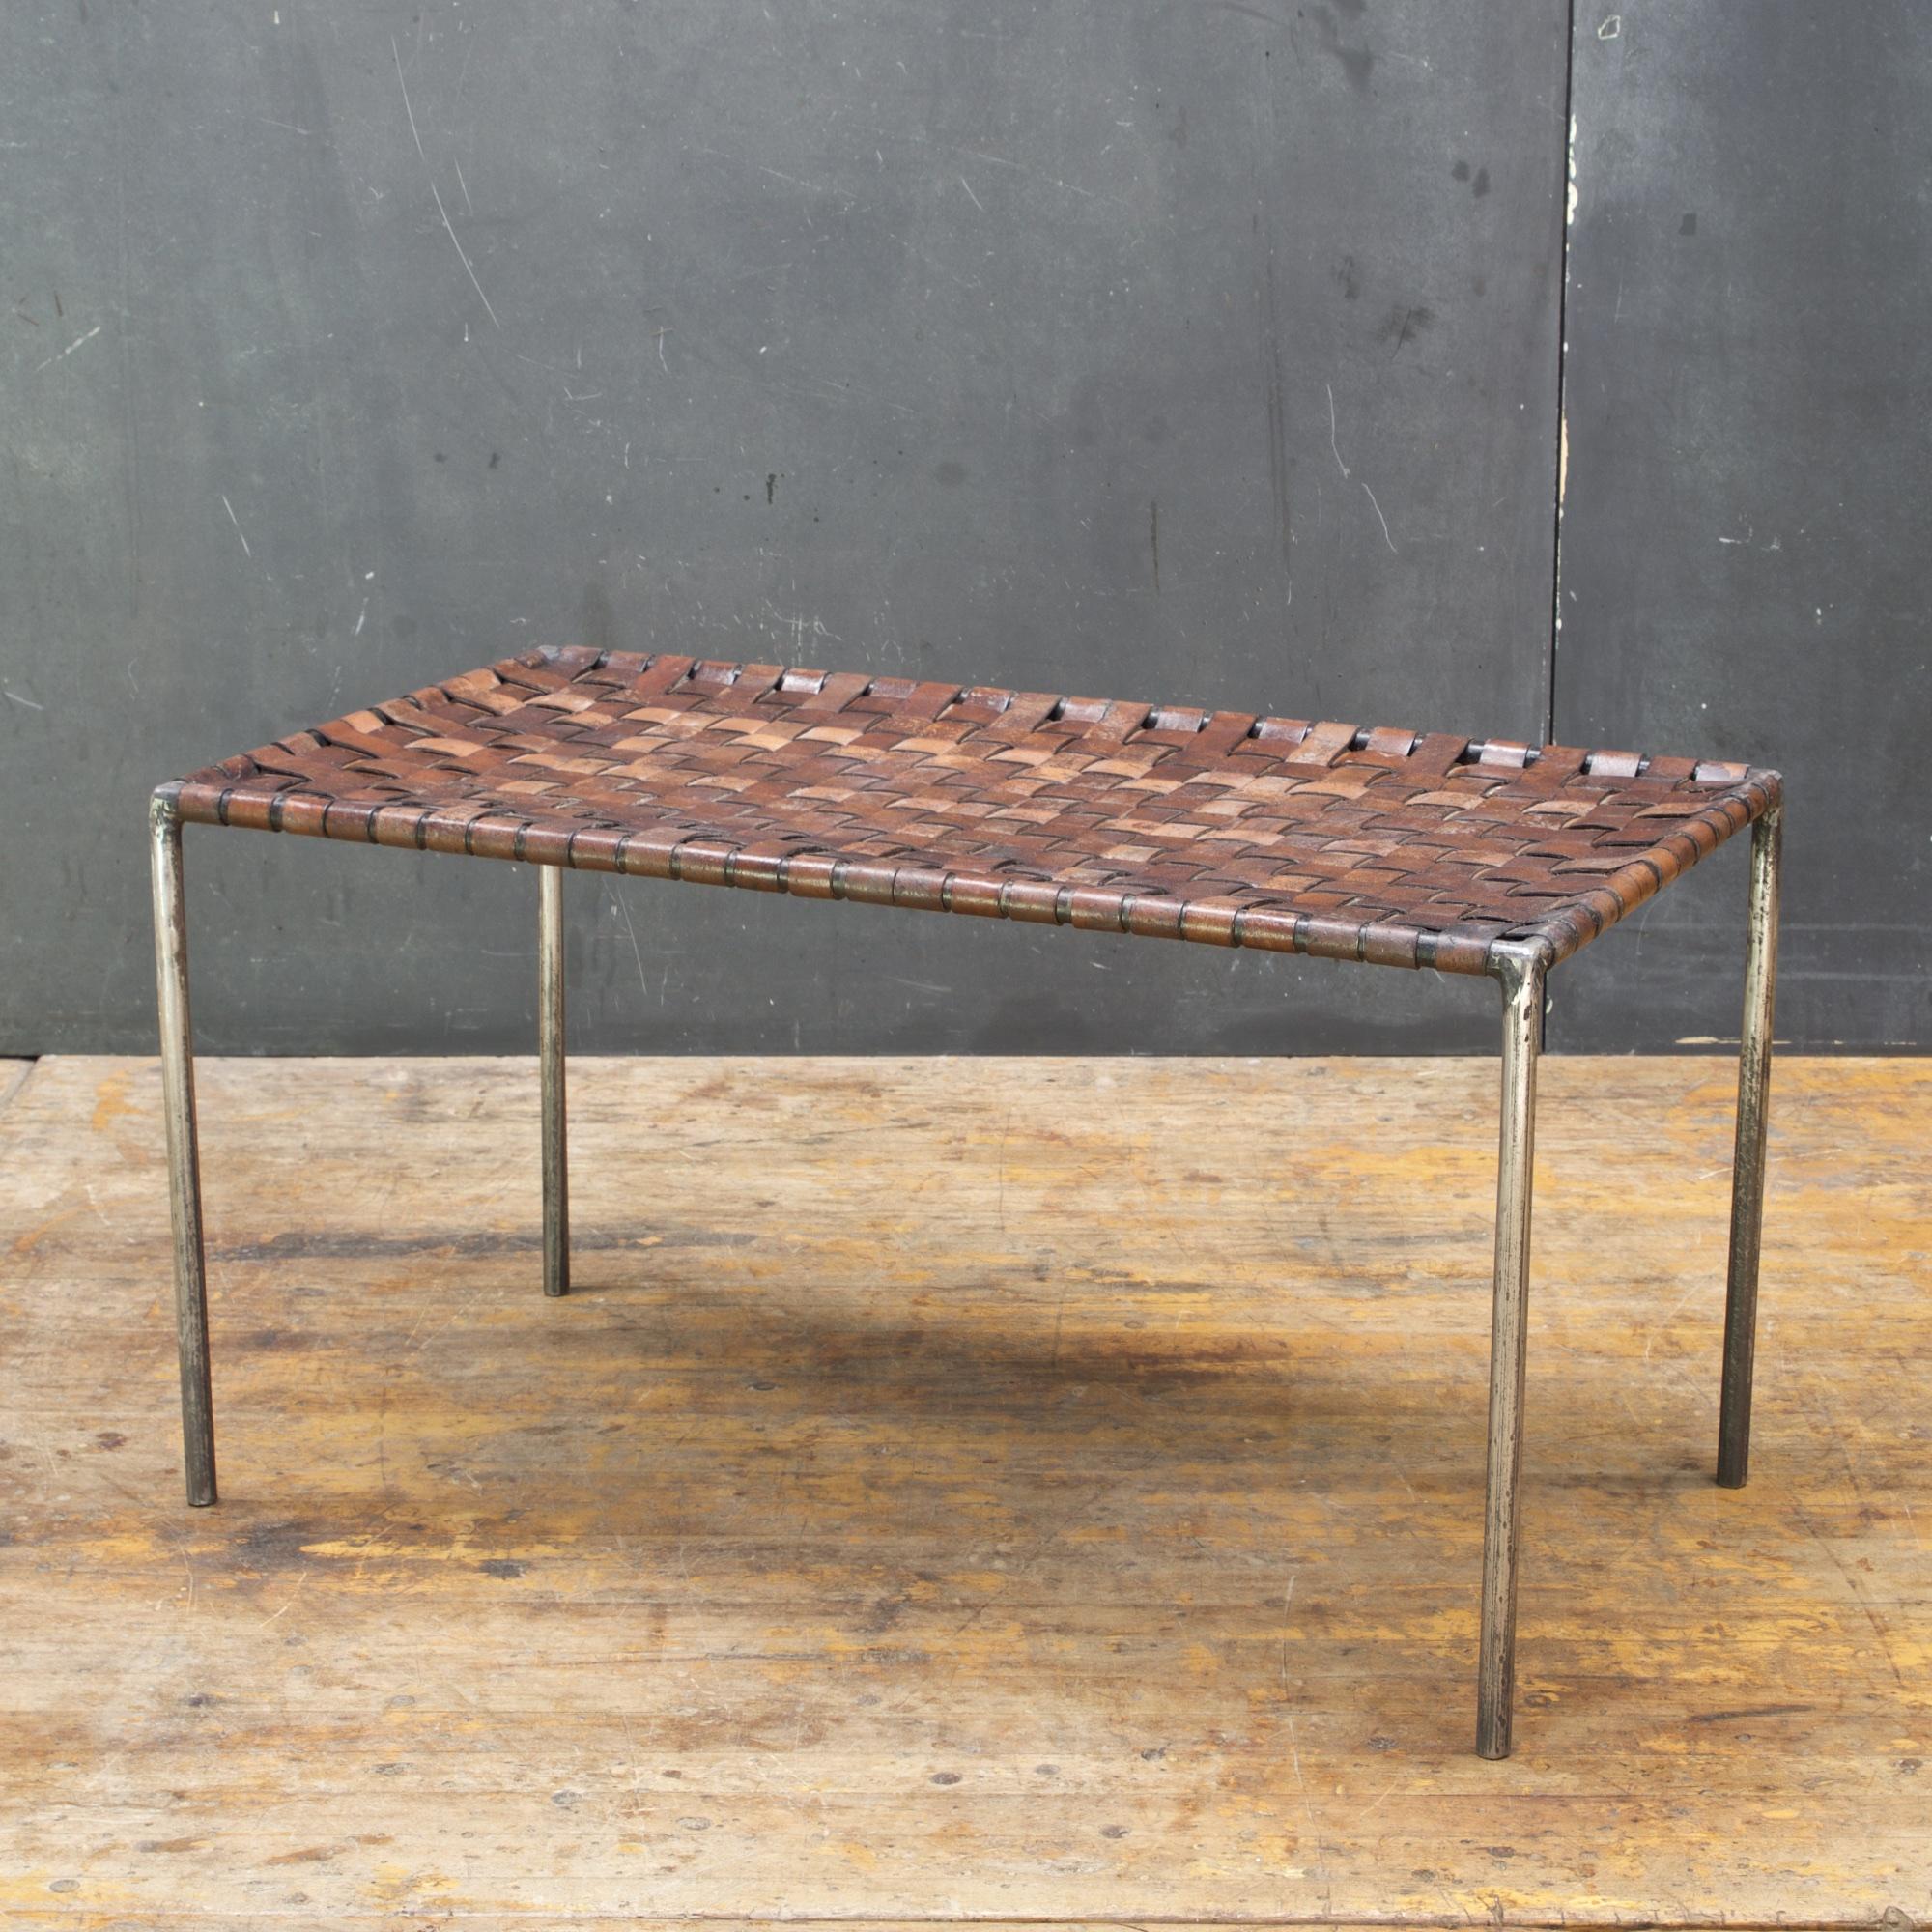 This piece is In the manner of Swift and Monell designed furniture. Beautifully patinated mid-century bench with a semi-polished welded iron/steel rod frame, with lattice woven webbed leather strapping.